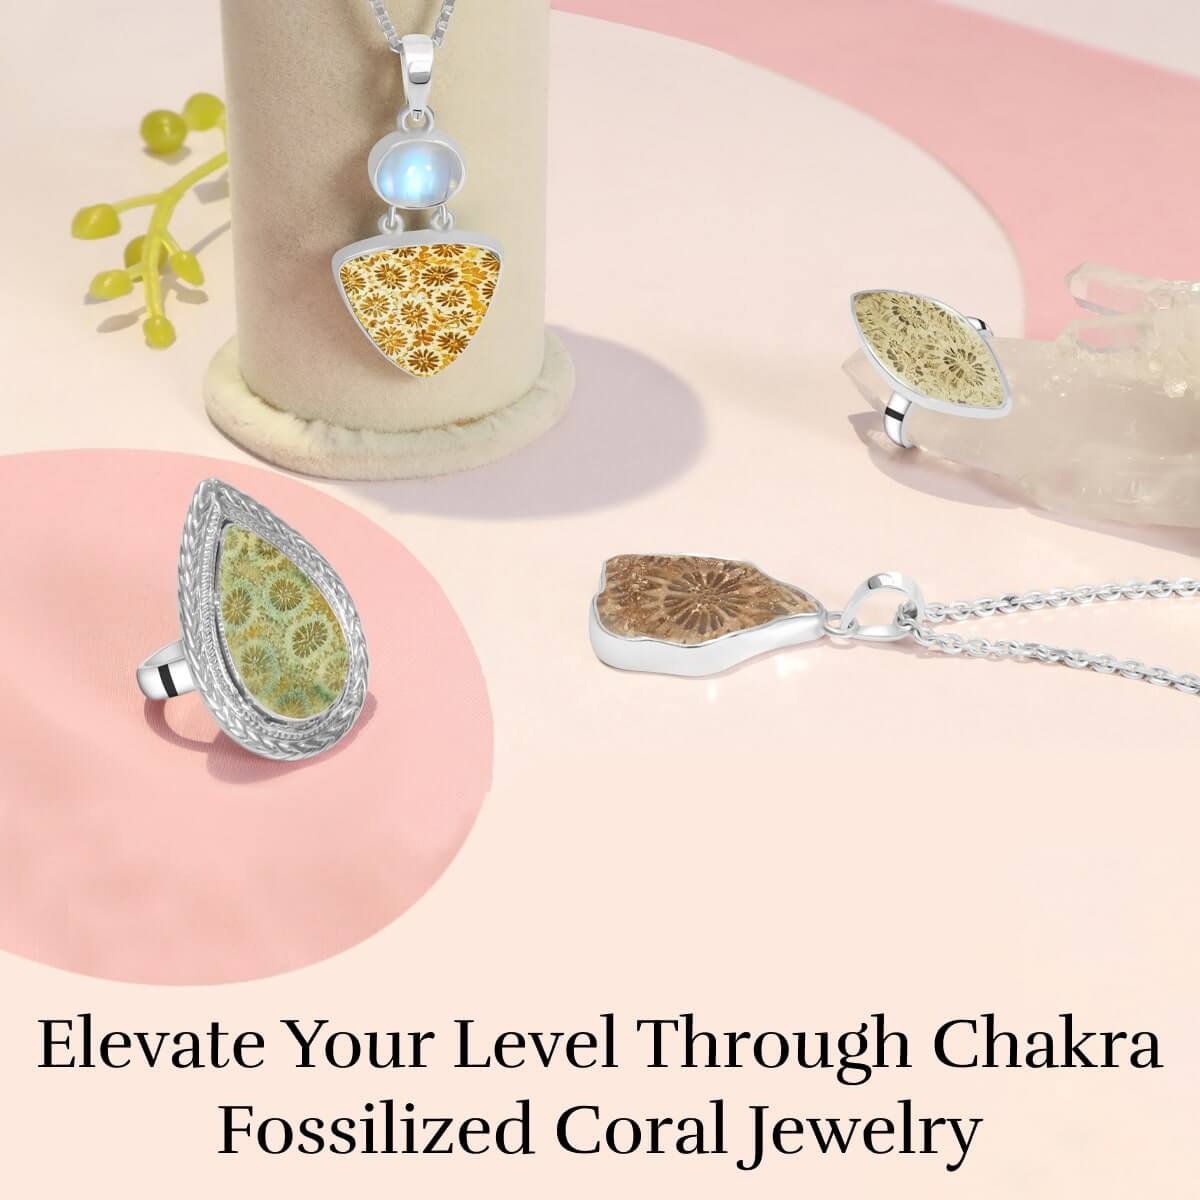 Activate Your Chakras with Unique Fossilized Coral Jewelry